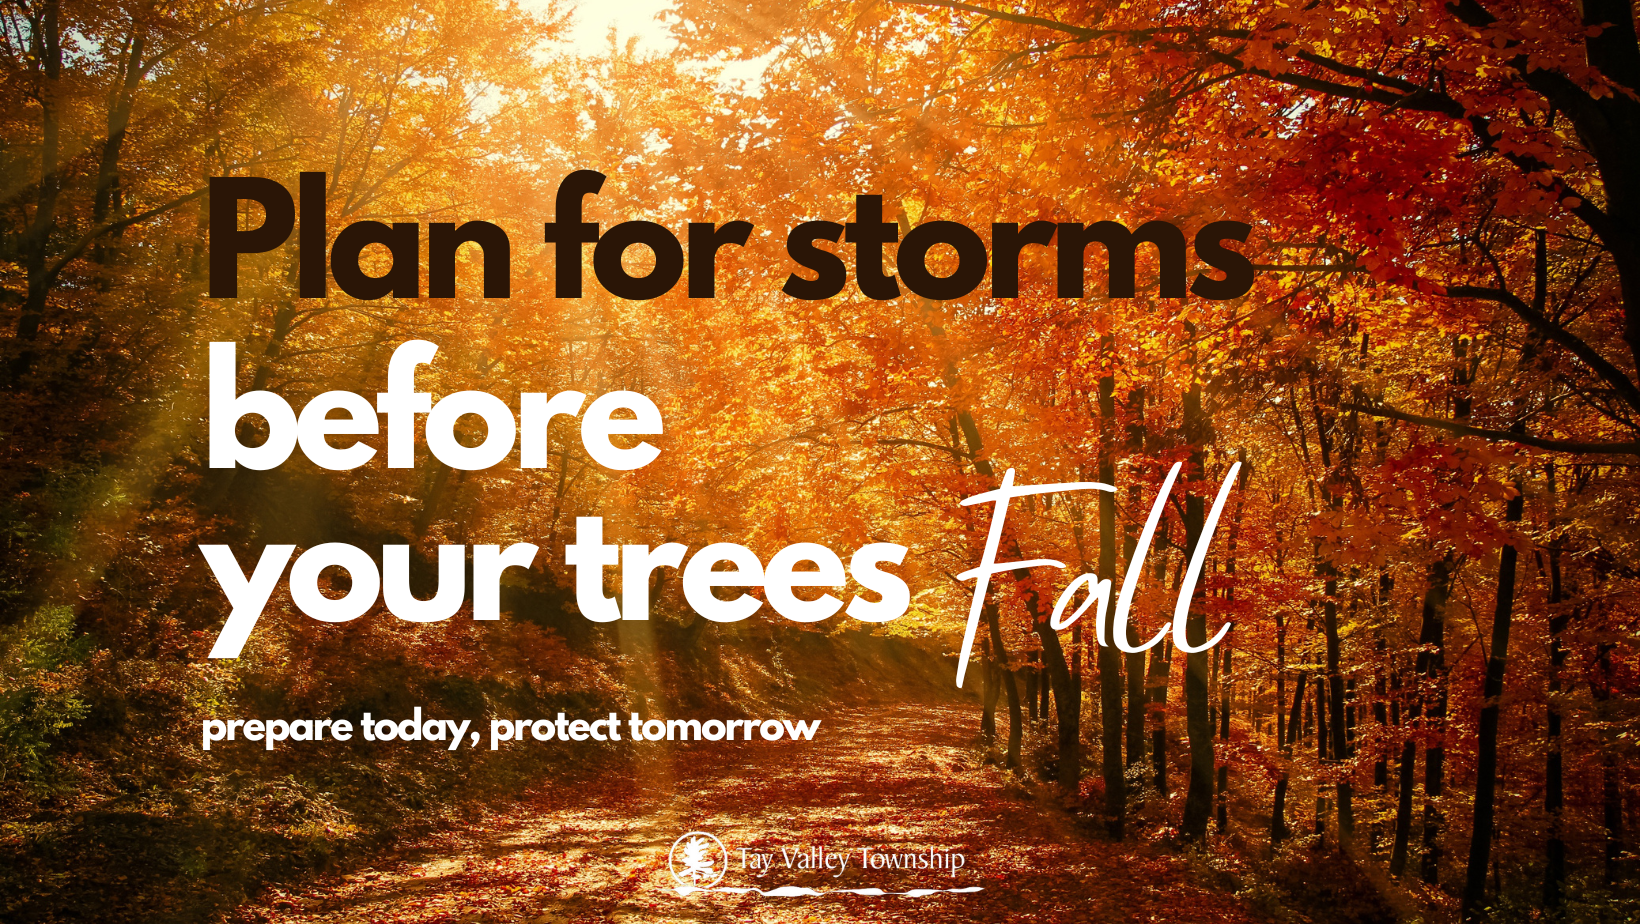 Emergency Preparedness Poster showing autumn leaves. Text reads: Plan for storms before your trees Fall. Prepare today, protect tomorrow.